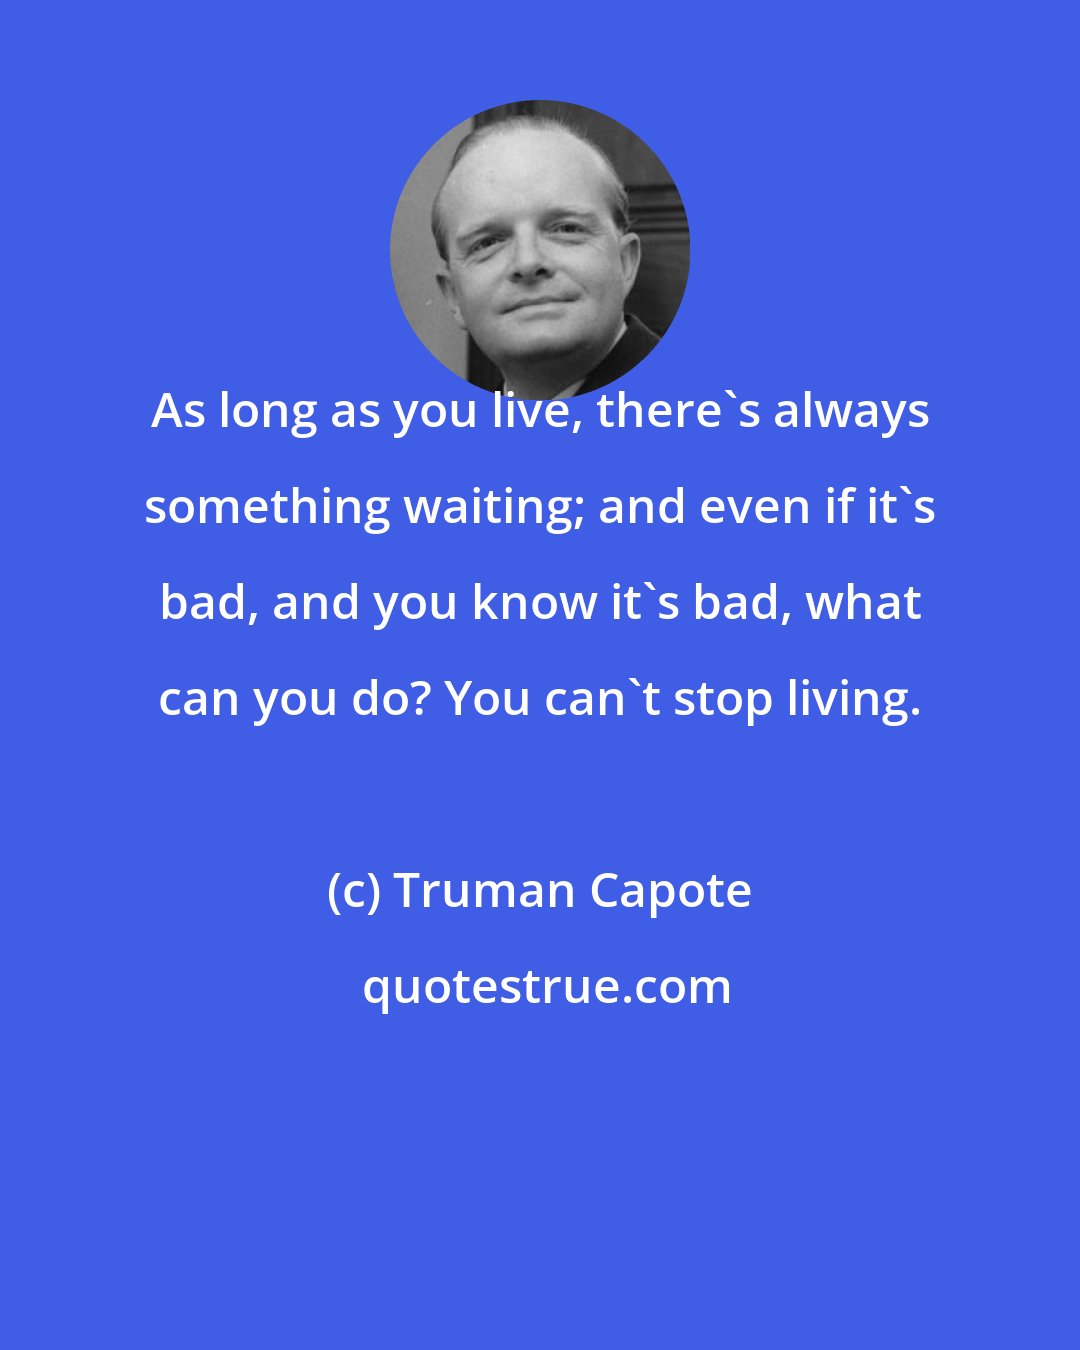 Truman Capote: As long as you live, there's always something waiting; and even if it's bad, and you know it's bad, what can you do? You can't stop living.